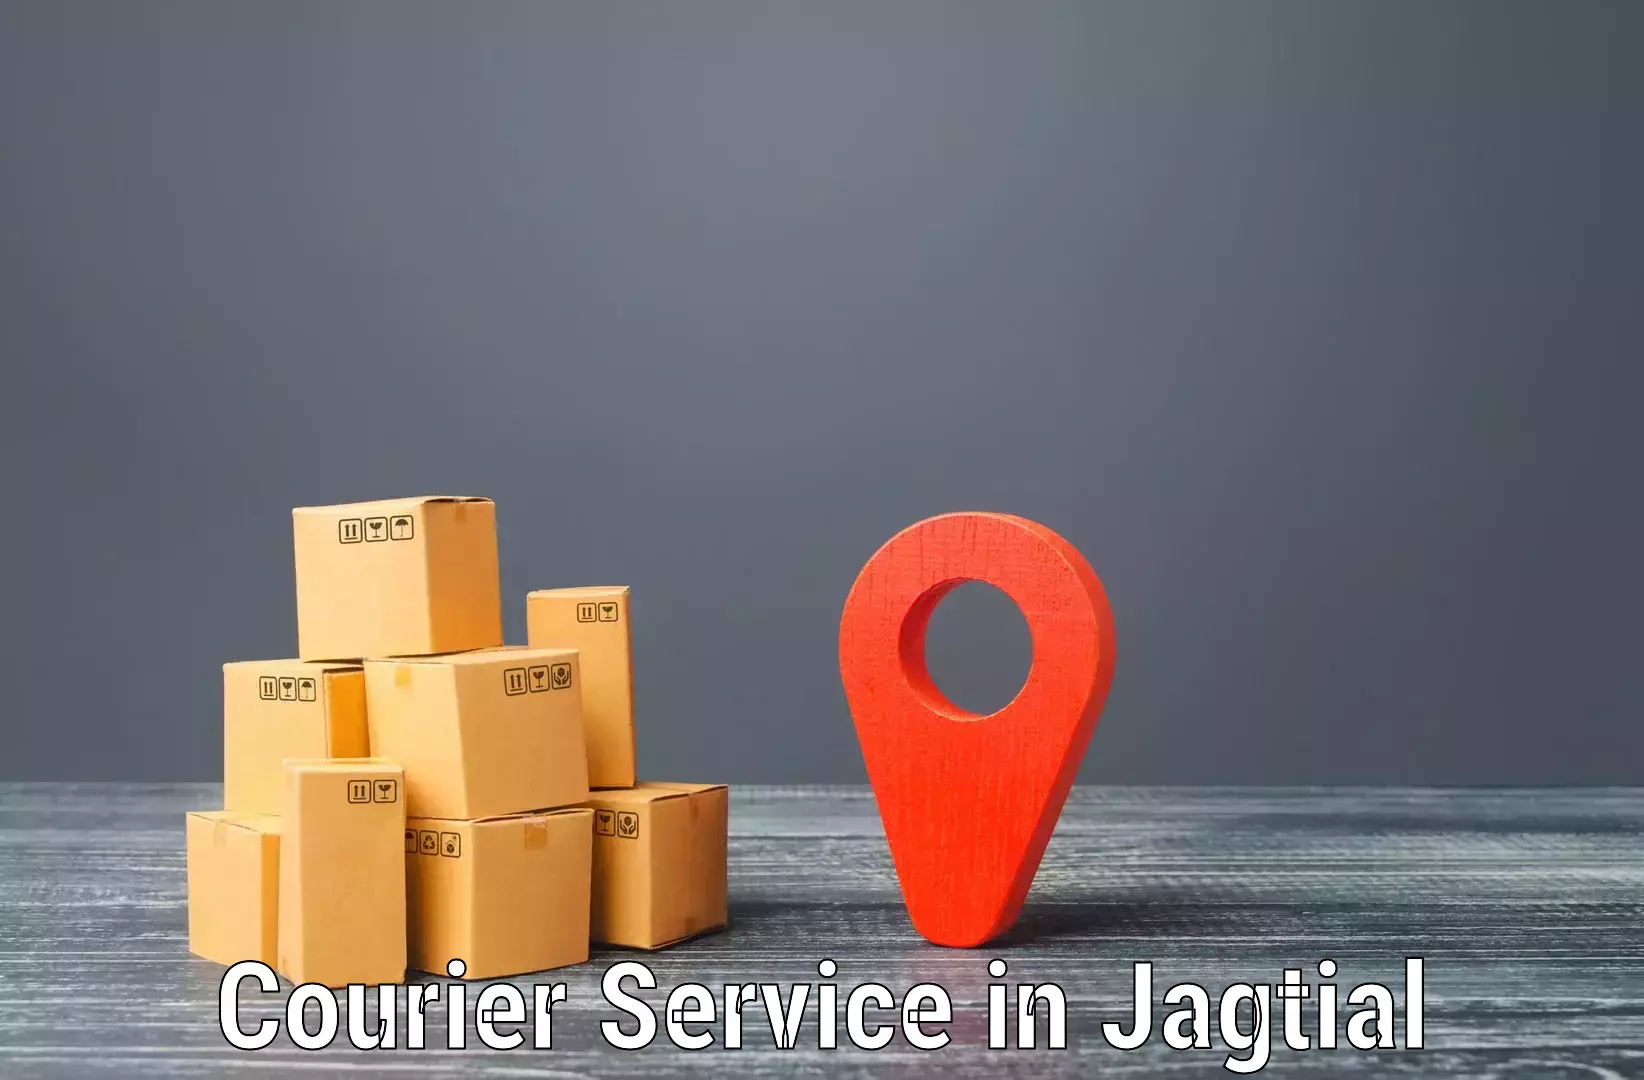 Fast delivery service in Jagtial